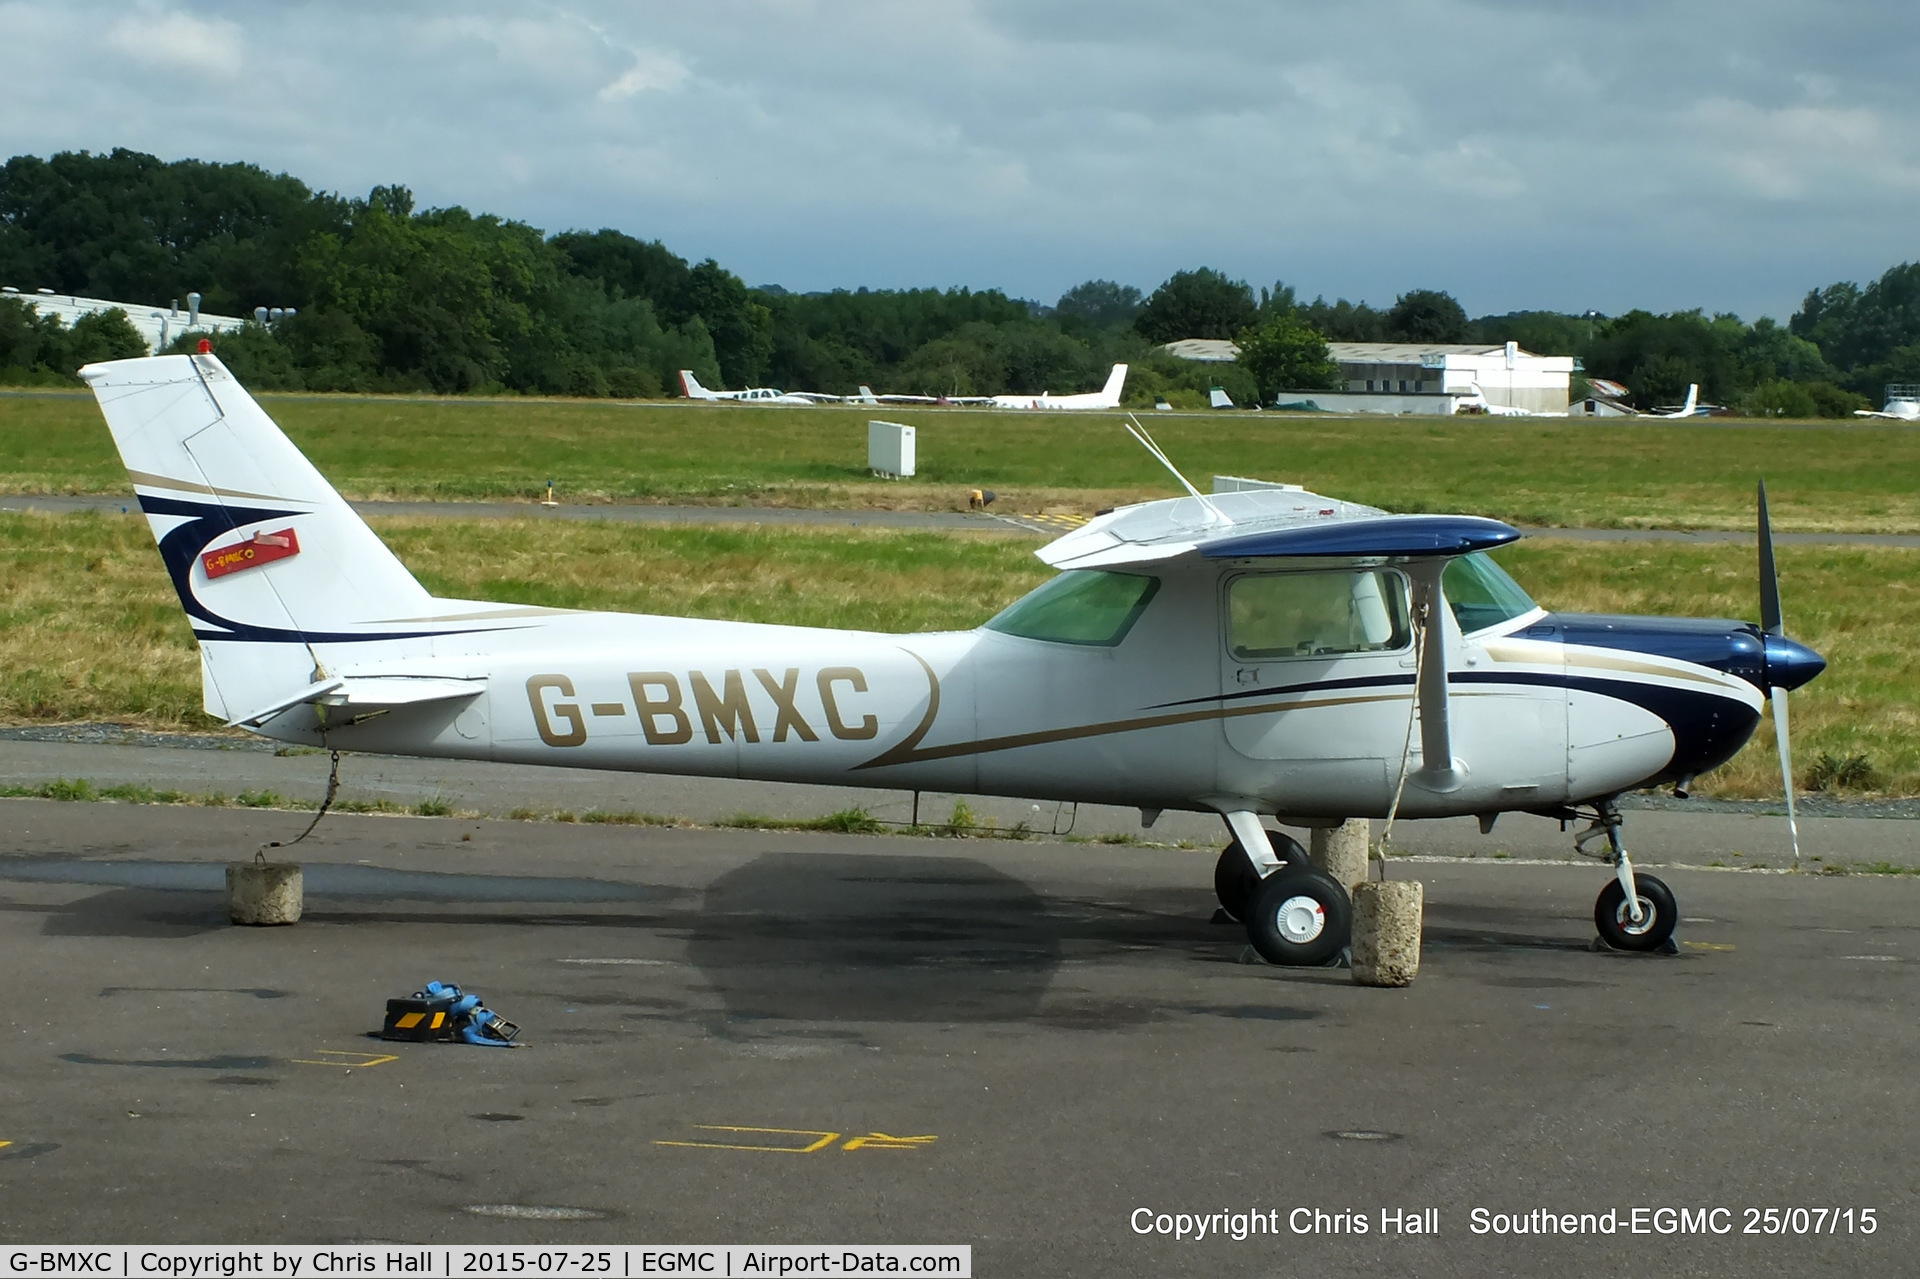 G-BMXC, 1977 Cessna 152 C/N 152-80416, at Southend